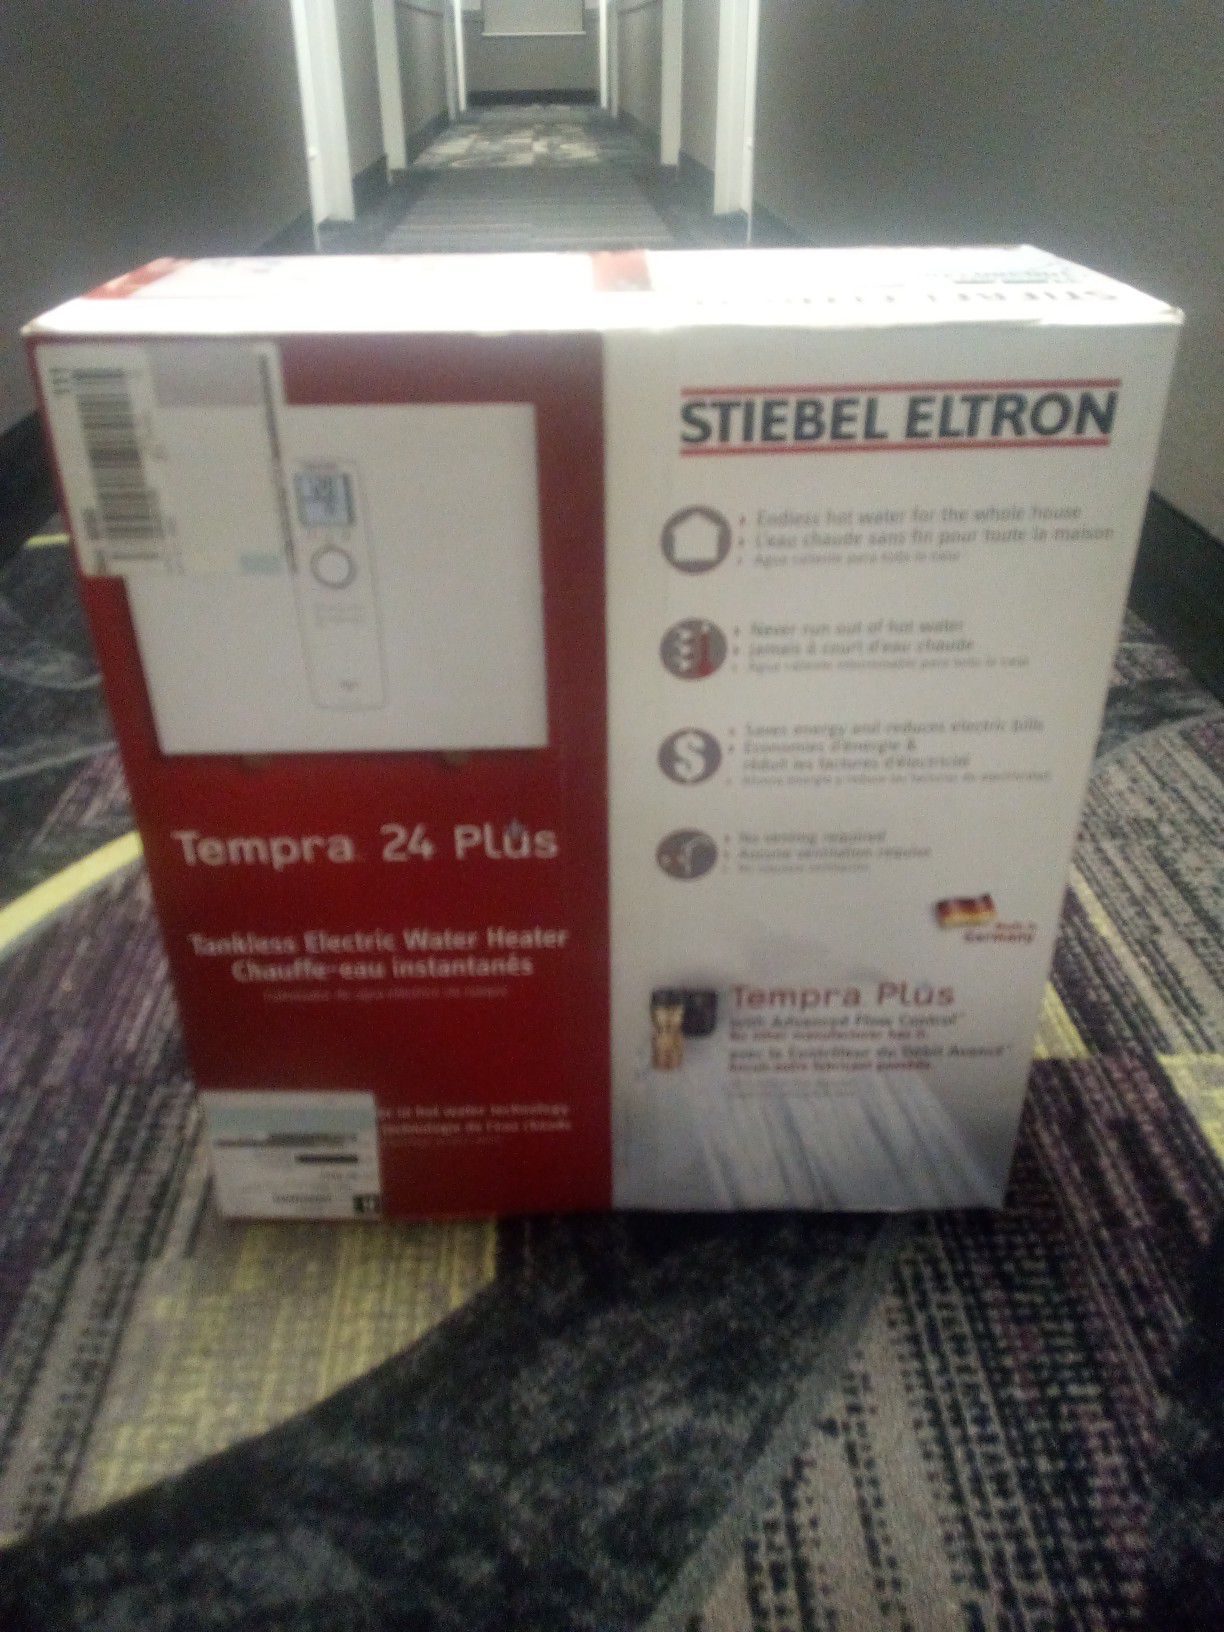 Stiebel Eltron Tankless Water Heater "Tempra 24 Plus" BRAND NEW * rated #1 overall